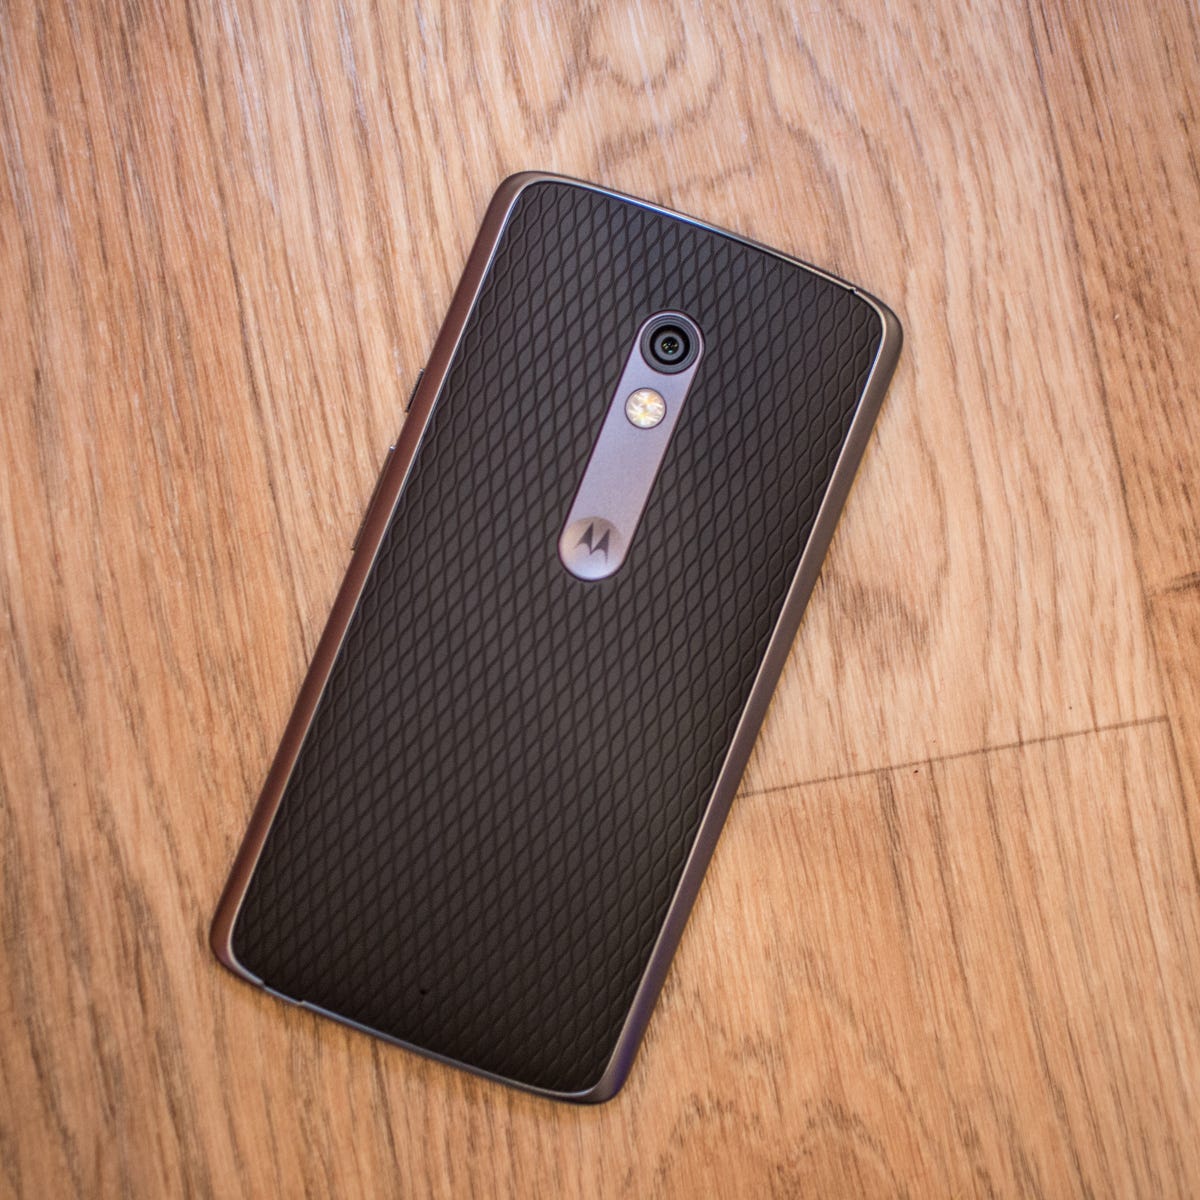 Becks veer Product Motorola Moto X Play review: A brilliant, customisable phone at a low price  - CNET